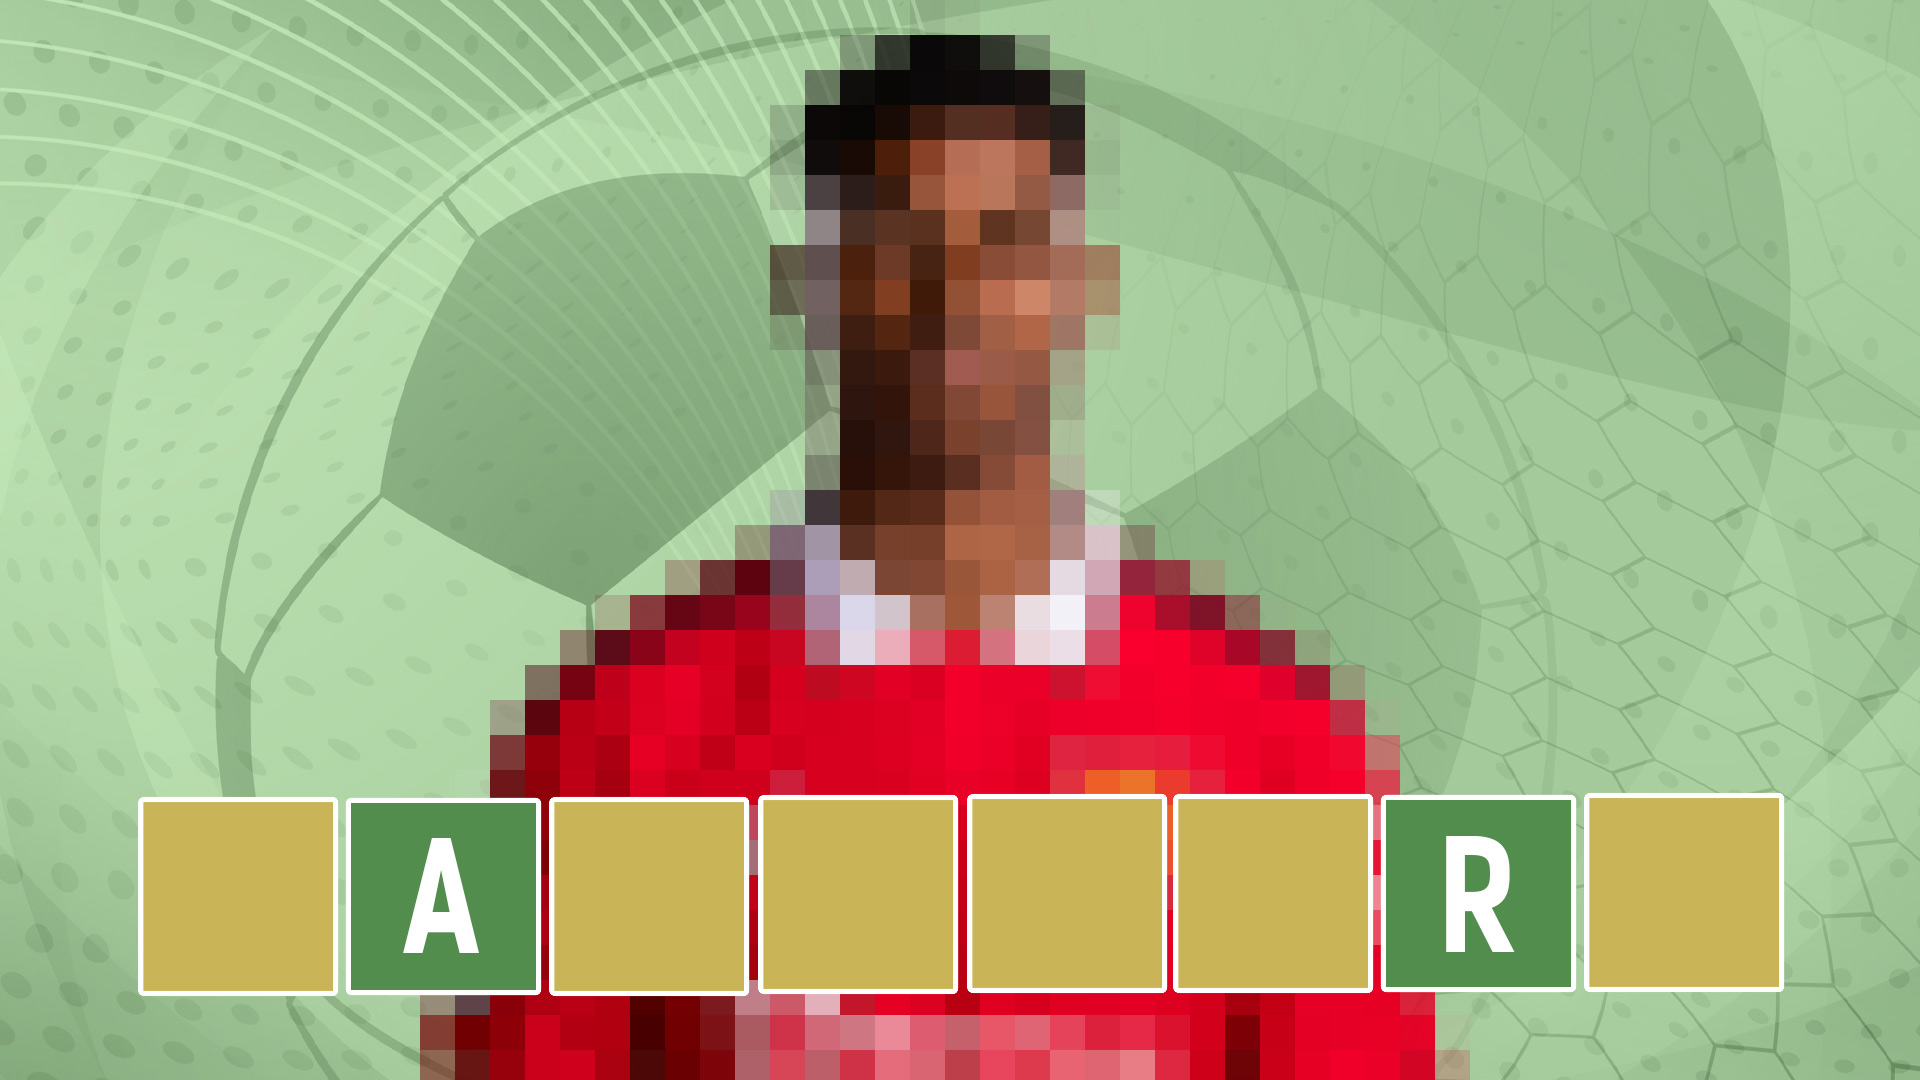 GUESS THE PLAYER - FOOTBALL WORDLE 20 